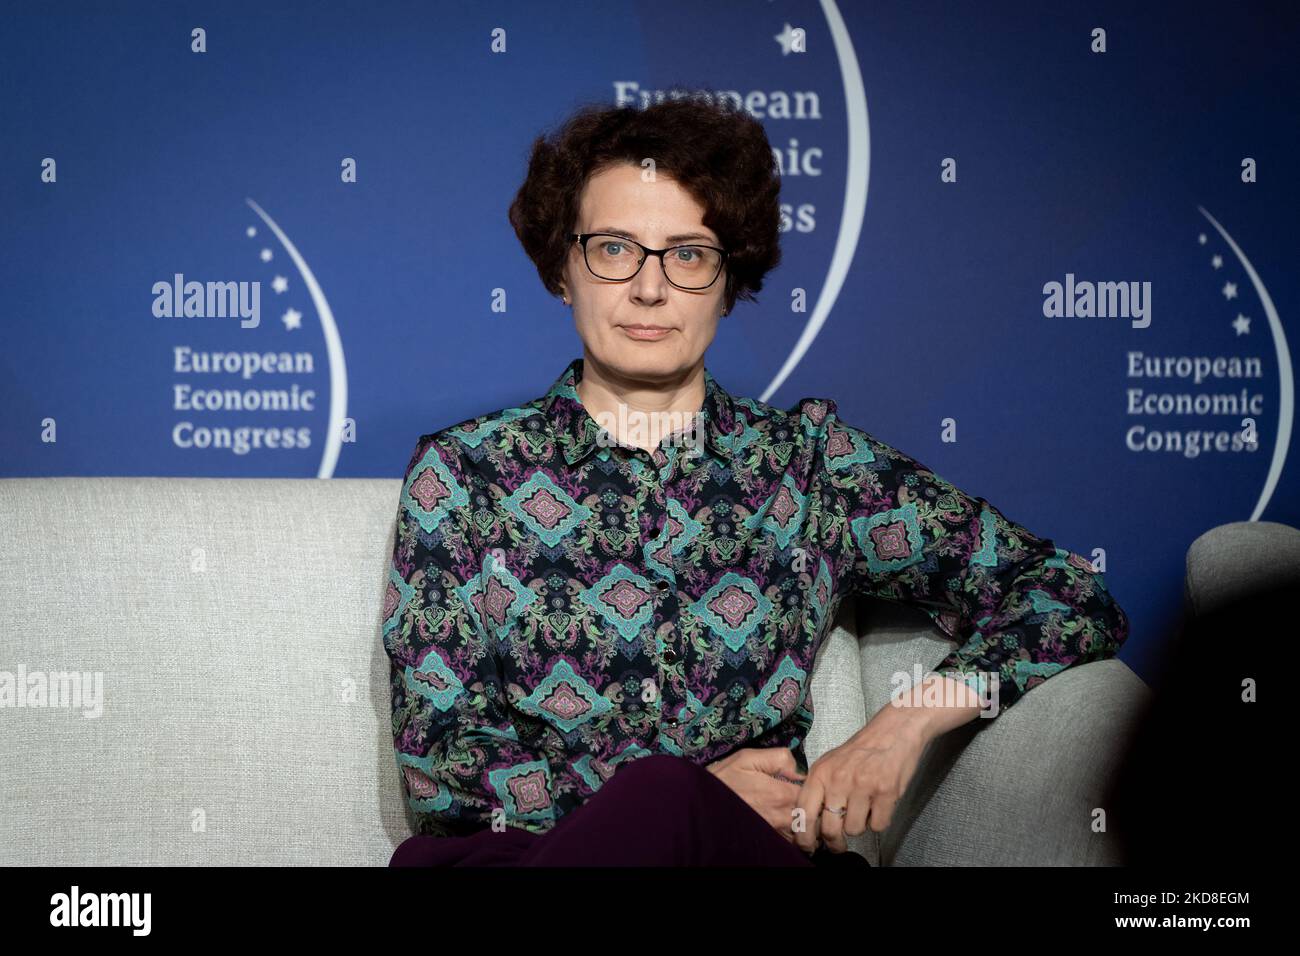 Jana Pieriegud (Institute of Infrastructure, Transport and Mobility) during the European Economic Congress in Katowice, Poland on April 25, 2022 (Photo by Mateusz Wlodarczyk/NurPhoto) Stock Photo